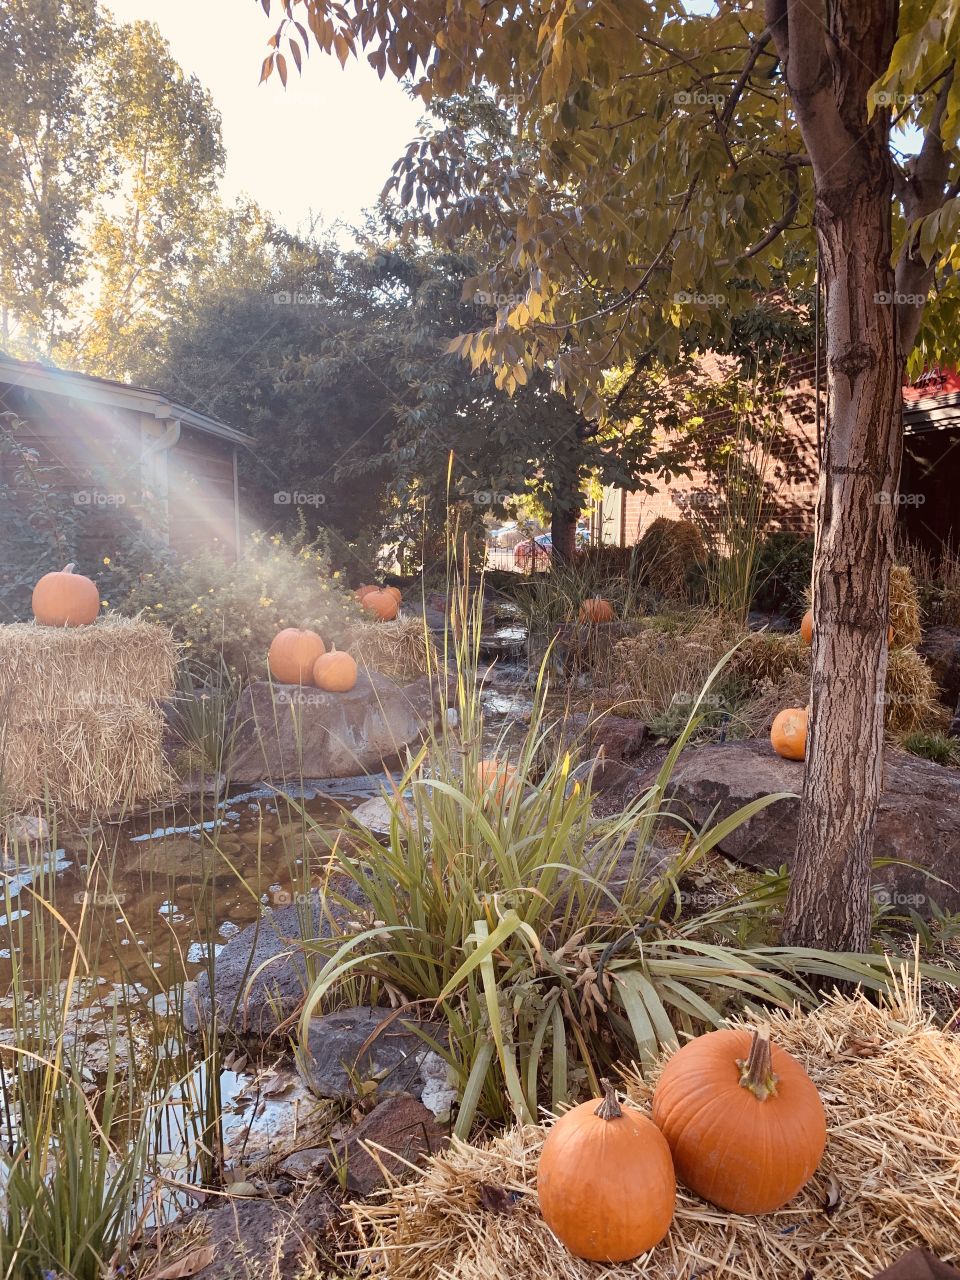 A beautiful autumn evening by the pond with pumpkins, trees and light shining through.